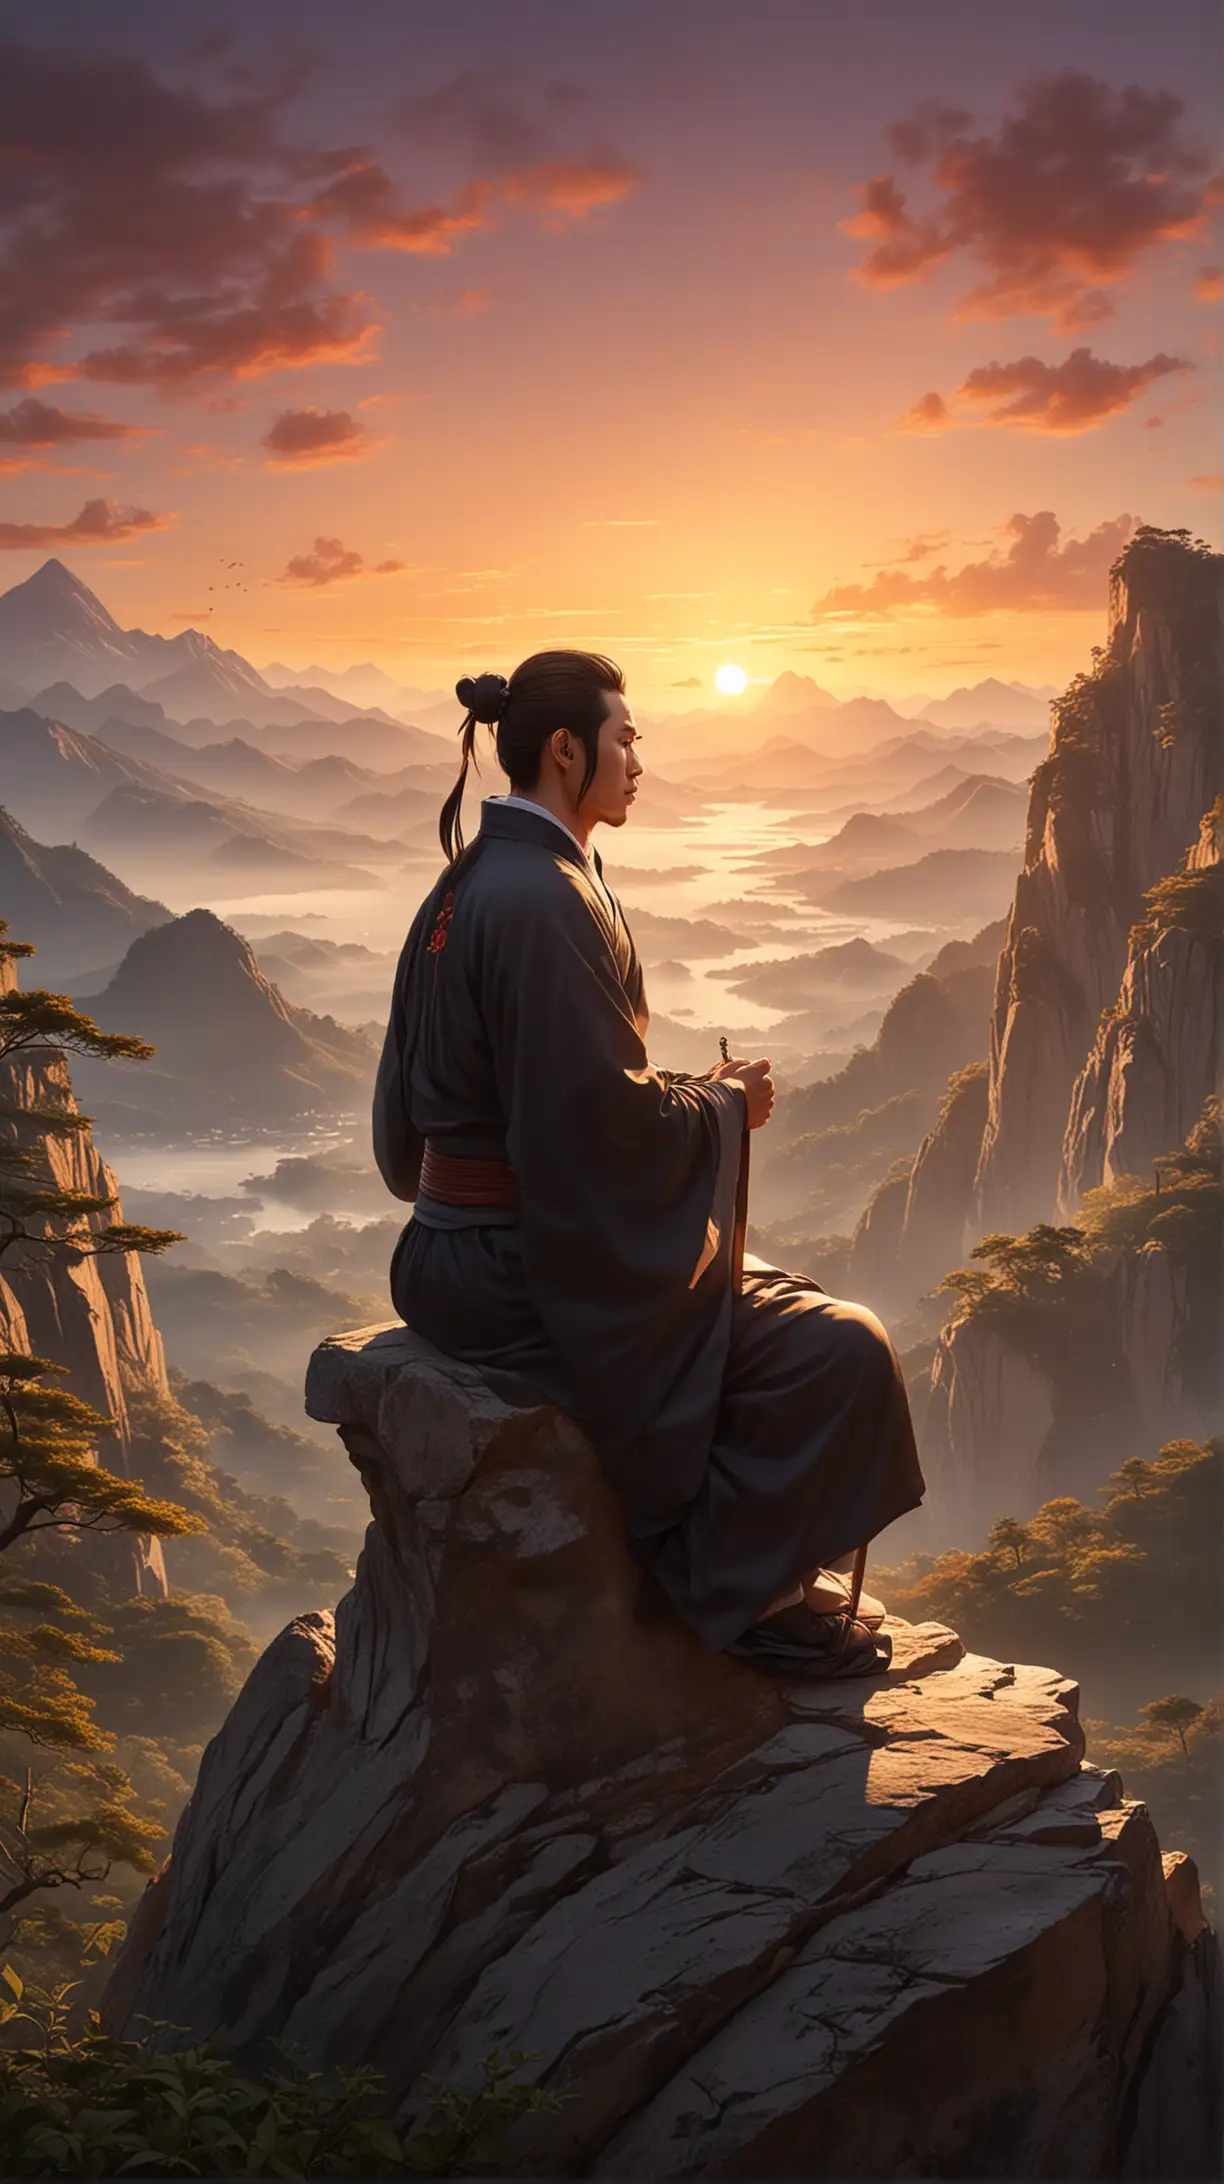 Draw a handsome male Taoist on the top of the mountain under the sunset background